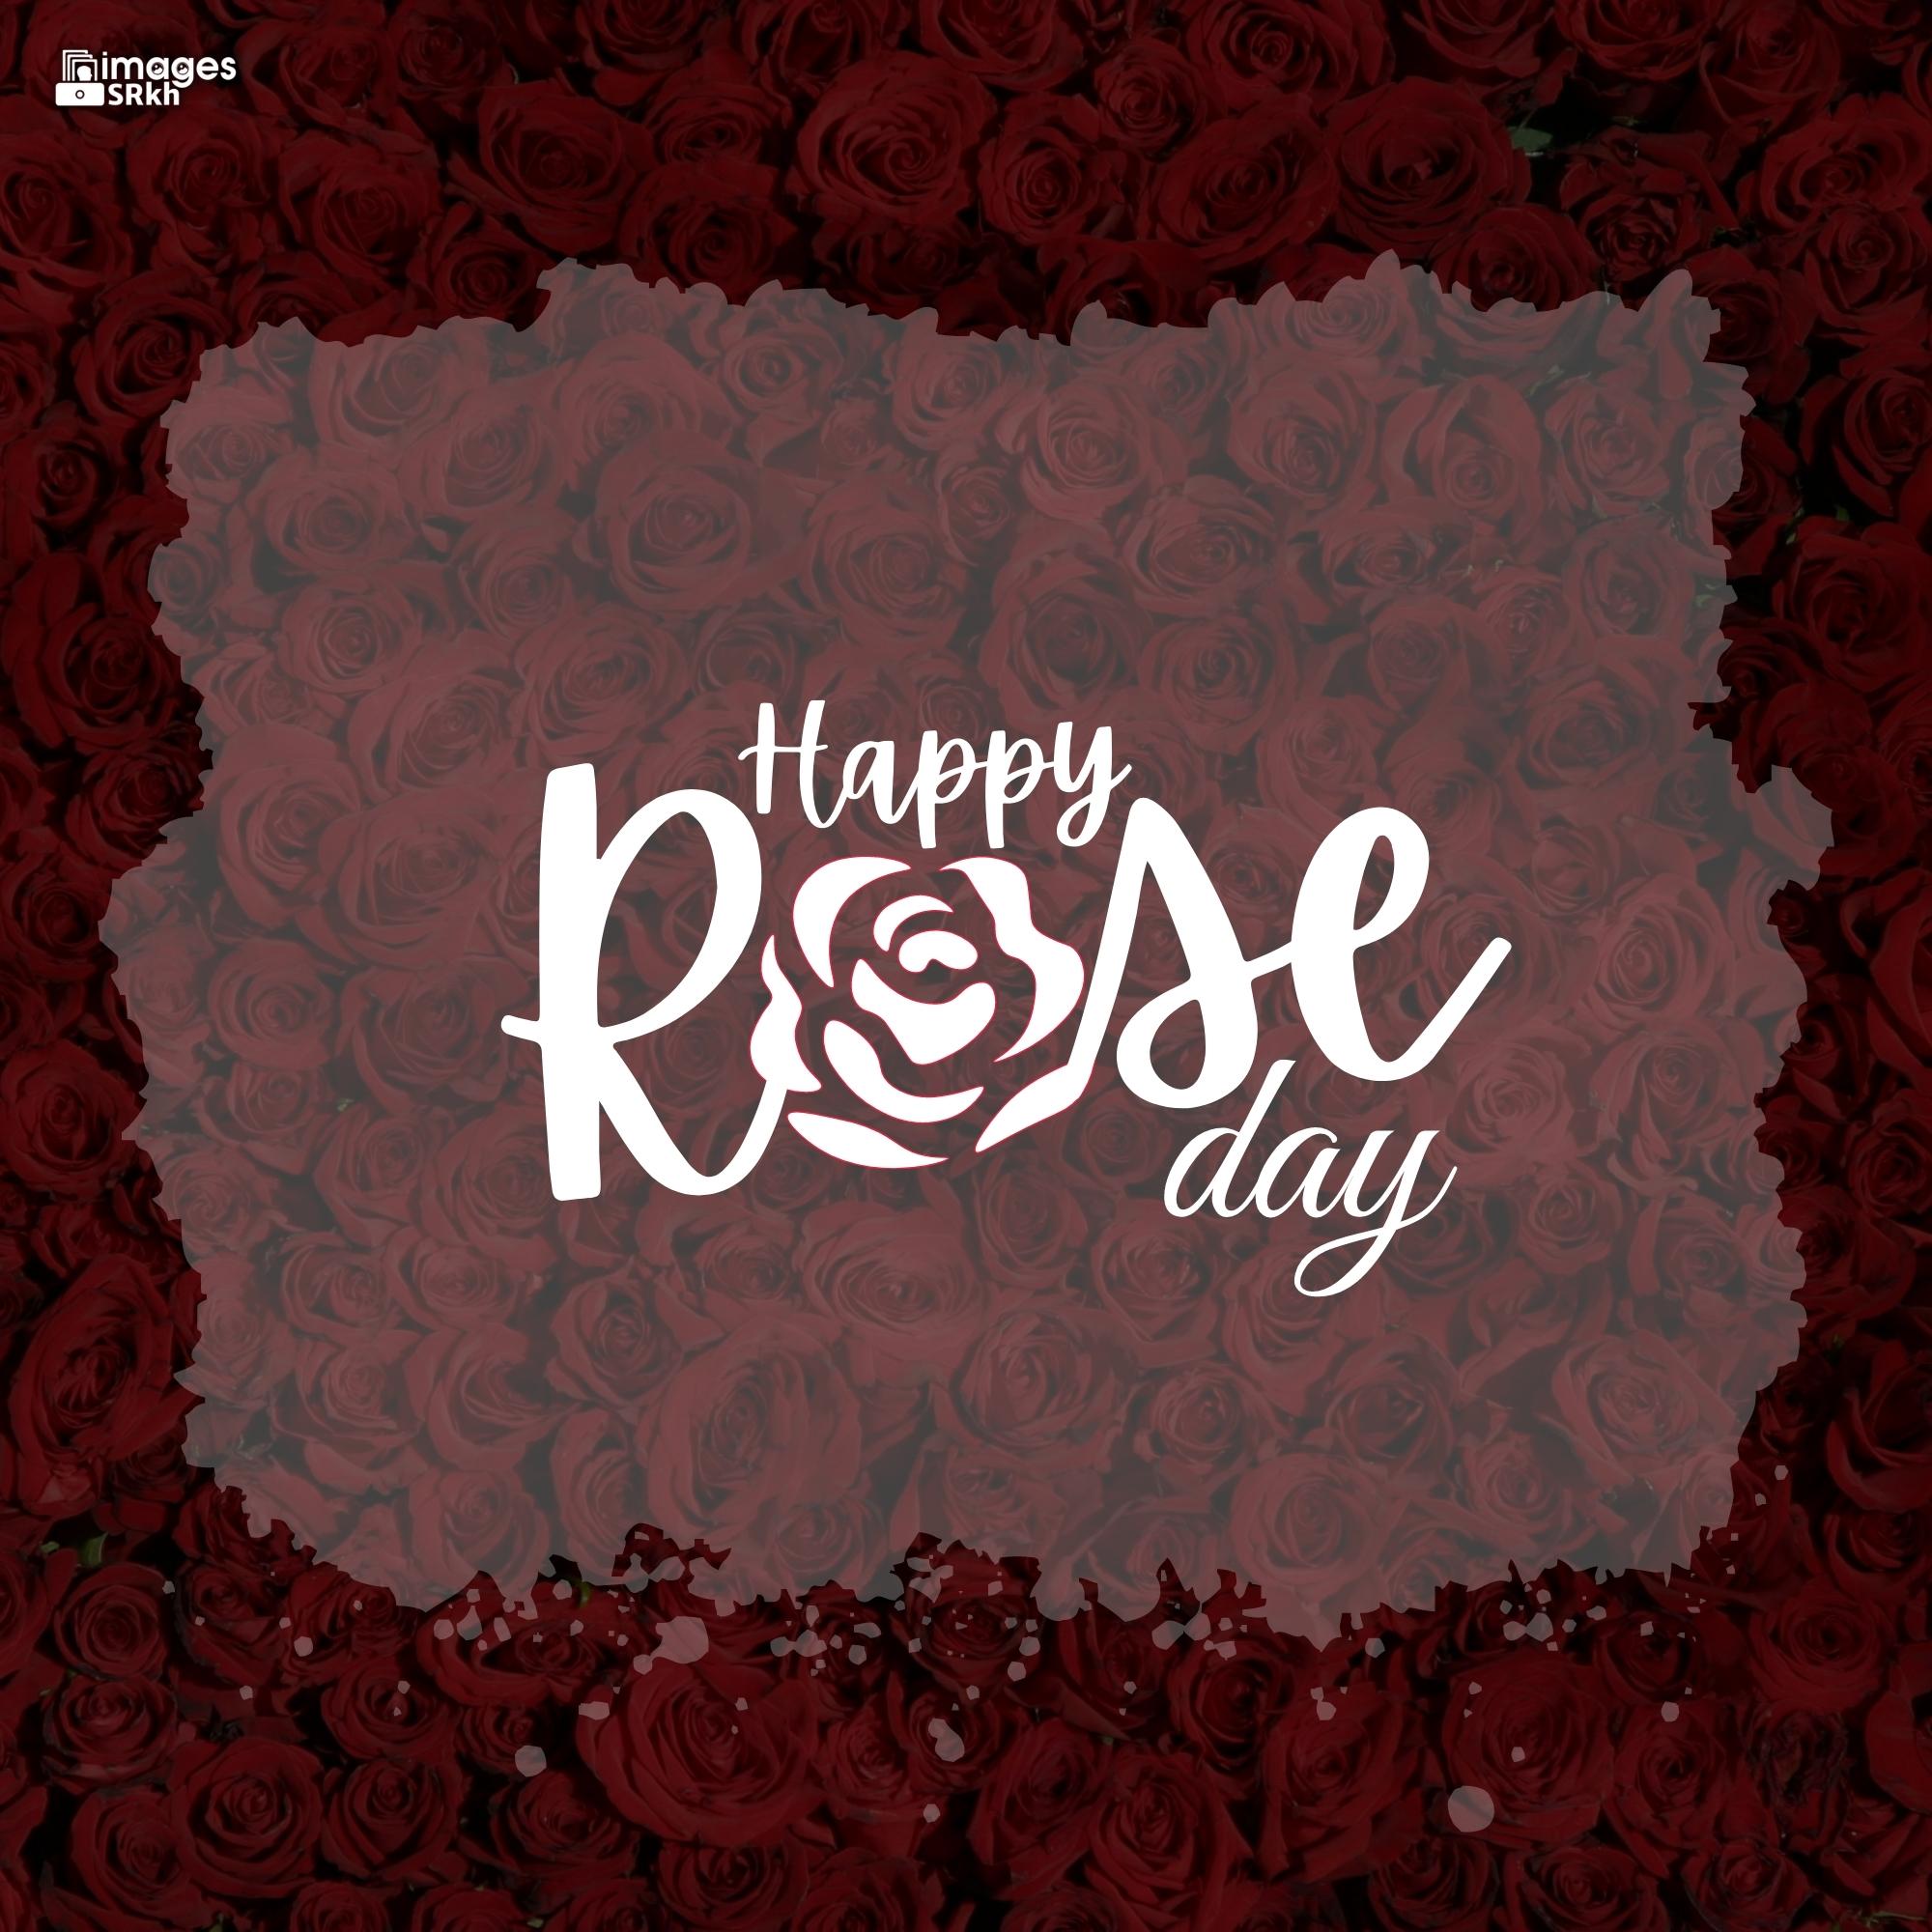 Happy Rose Day Image Hd Download (18)